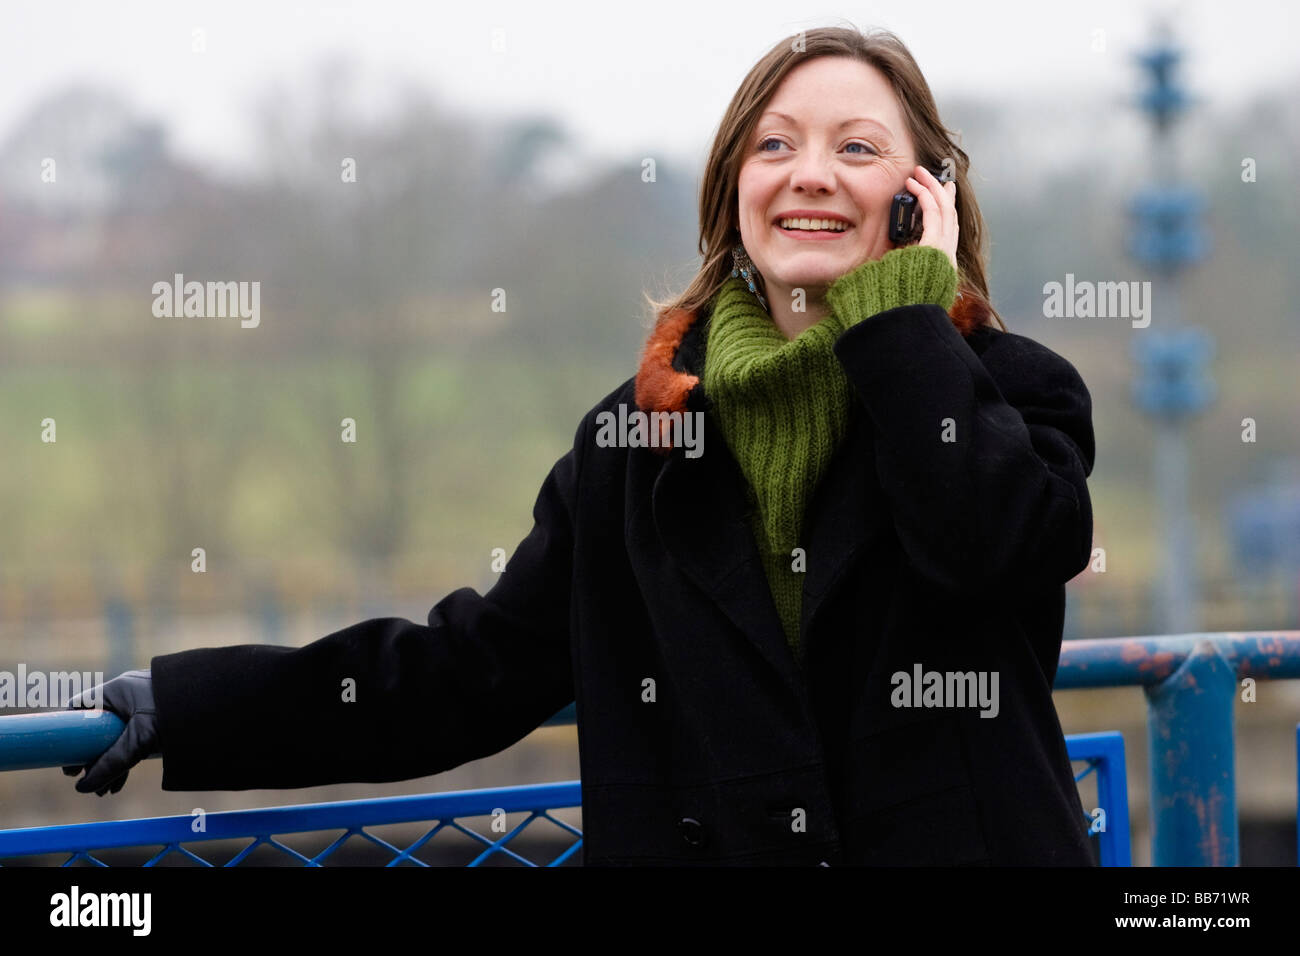 Young woman in her 30's outside on a moblie phone Stock Photo